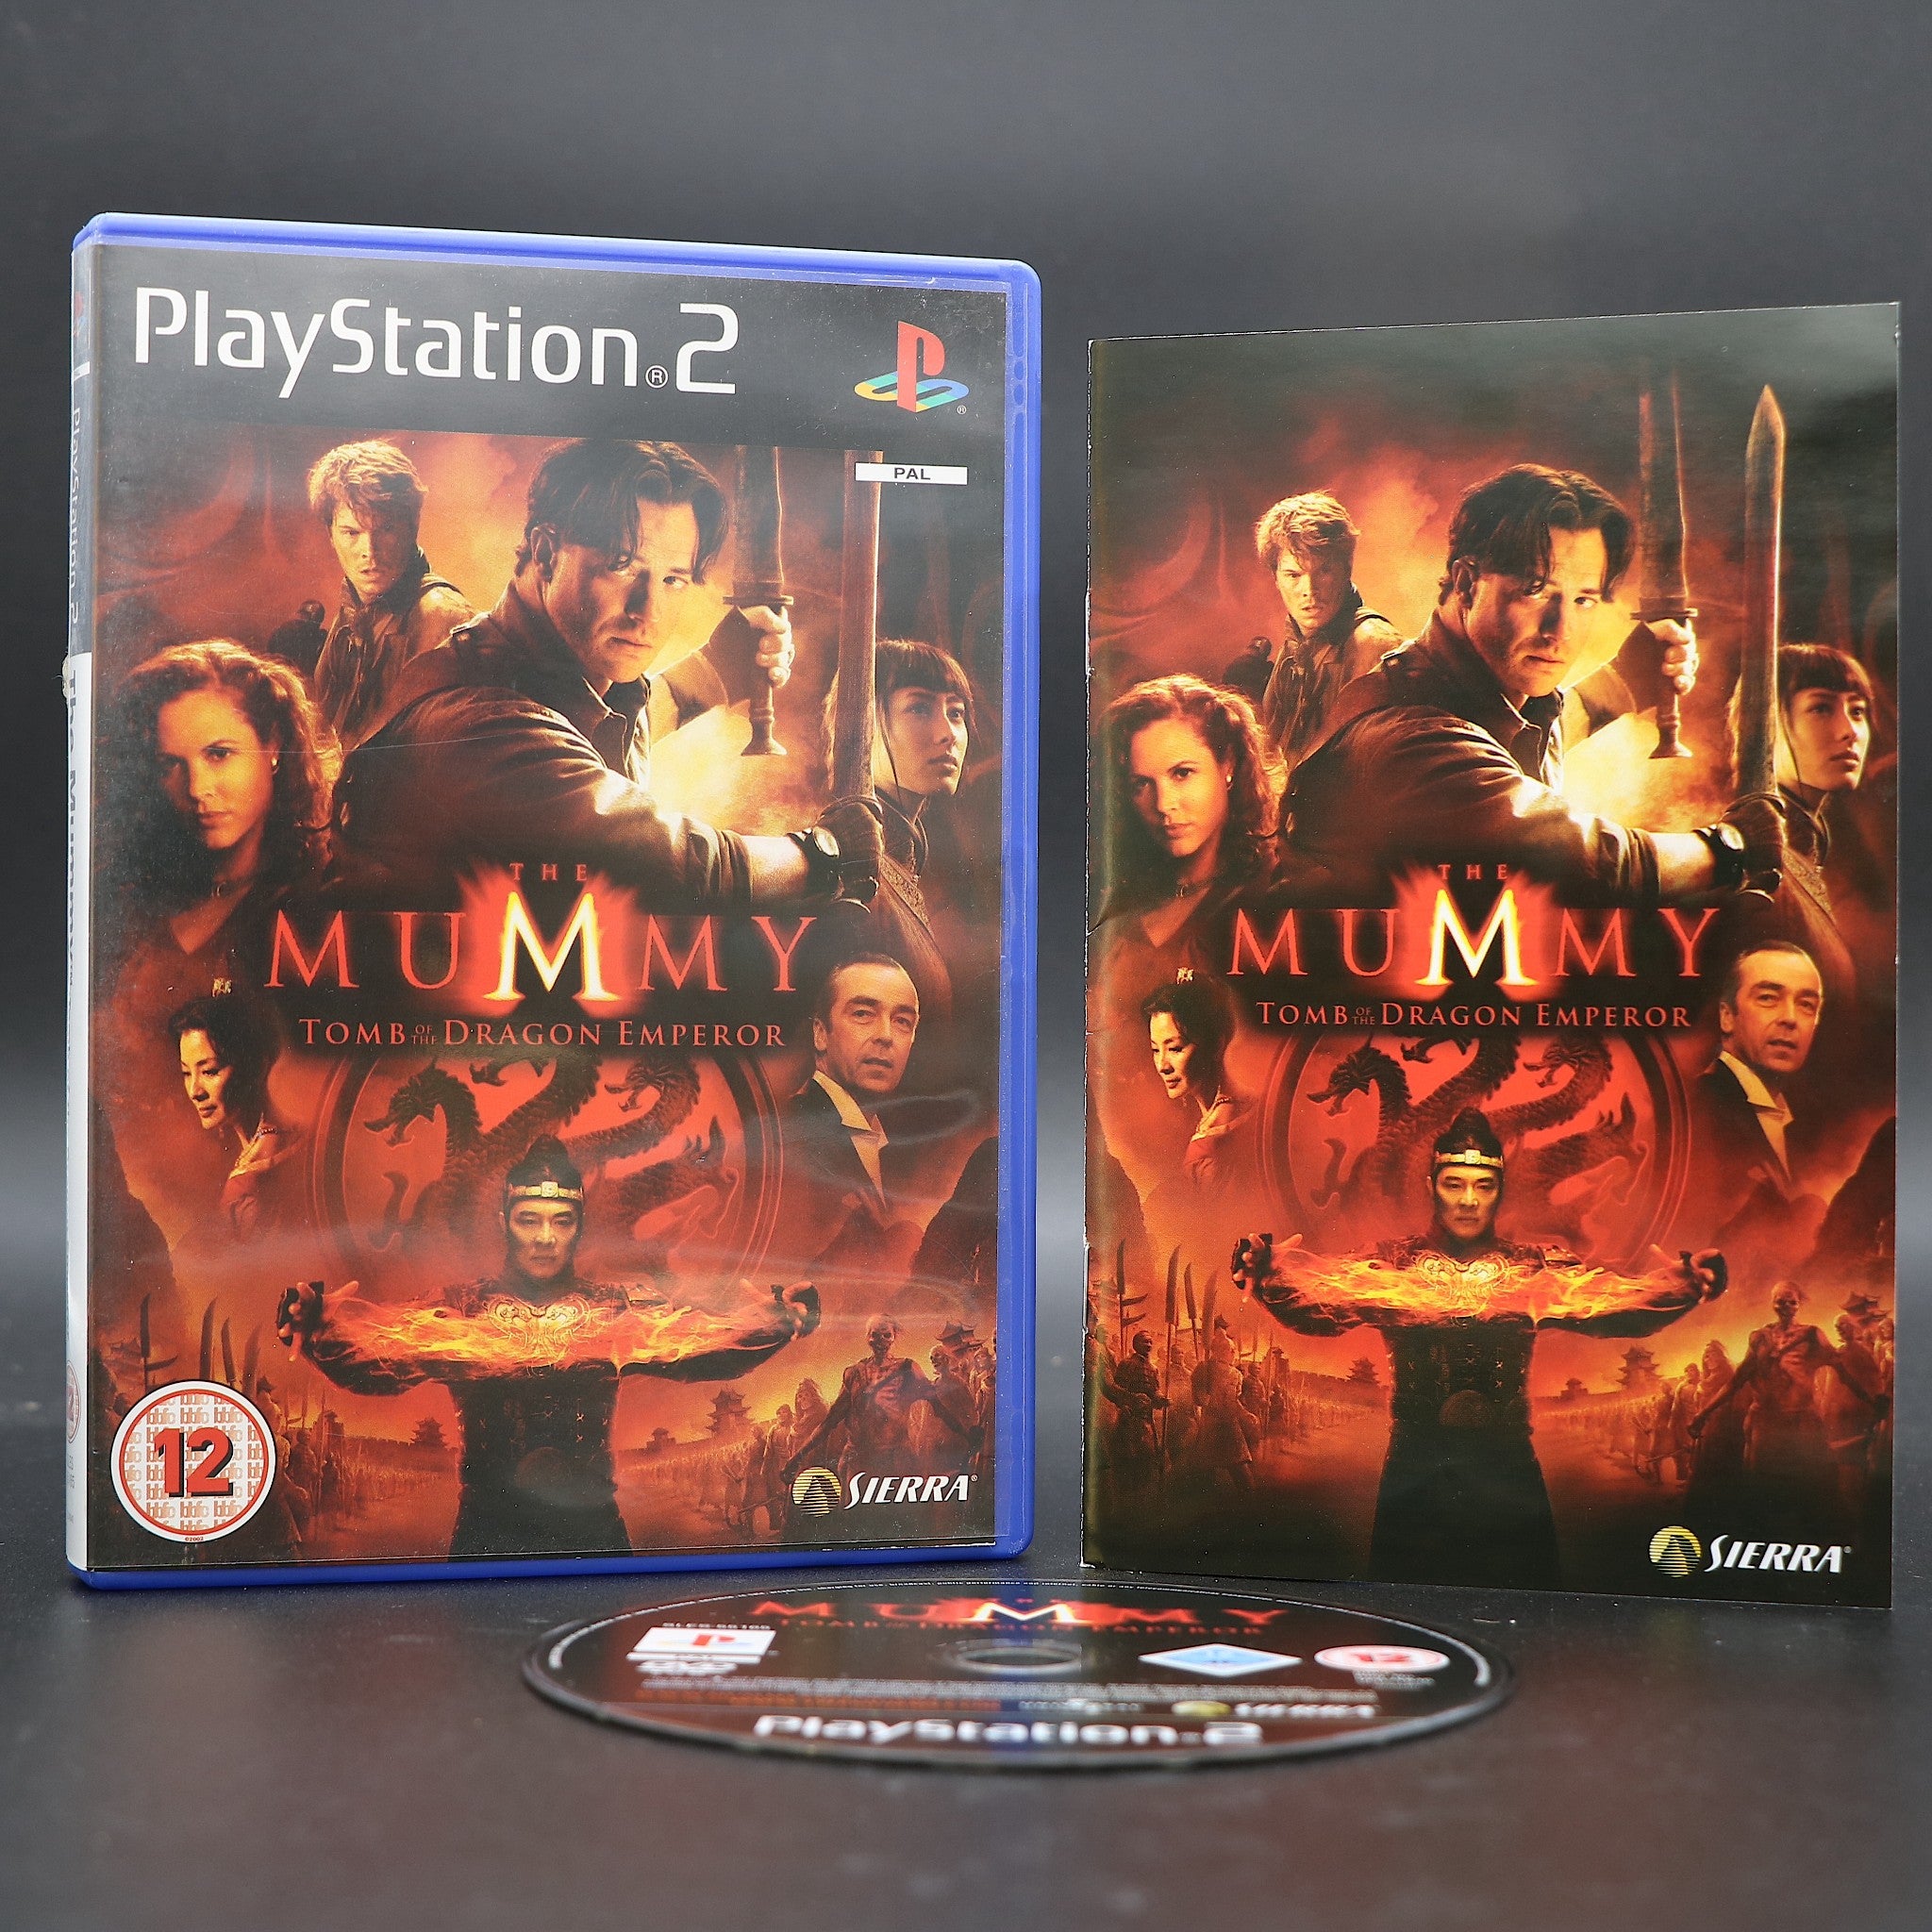 The Mummy | Tomb Of The Dragon Emperor | Sony PS2 Game | VGC